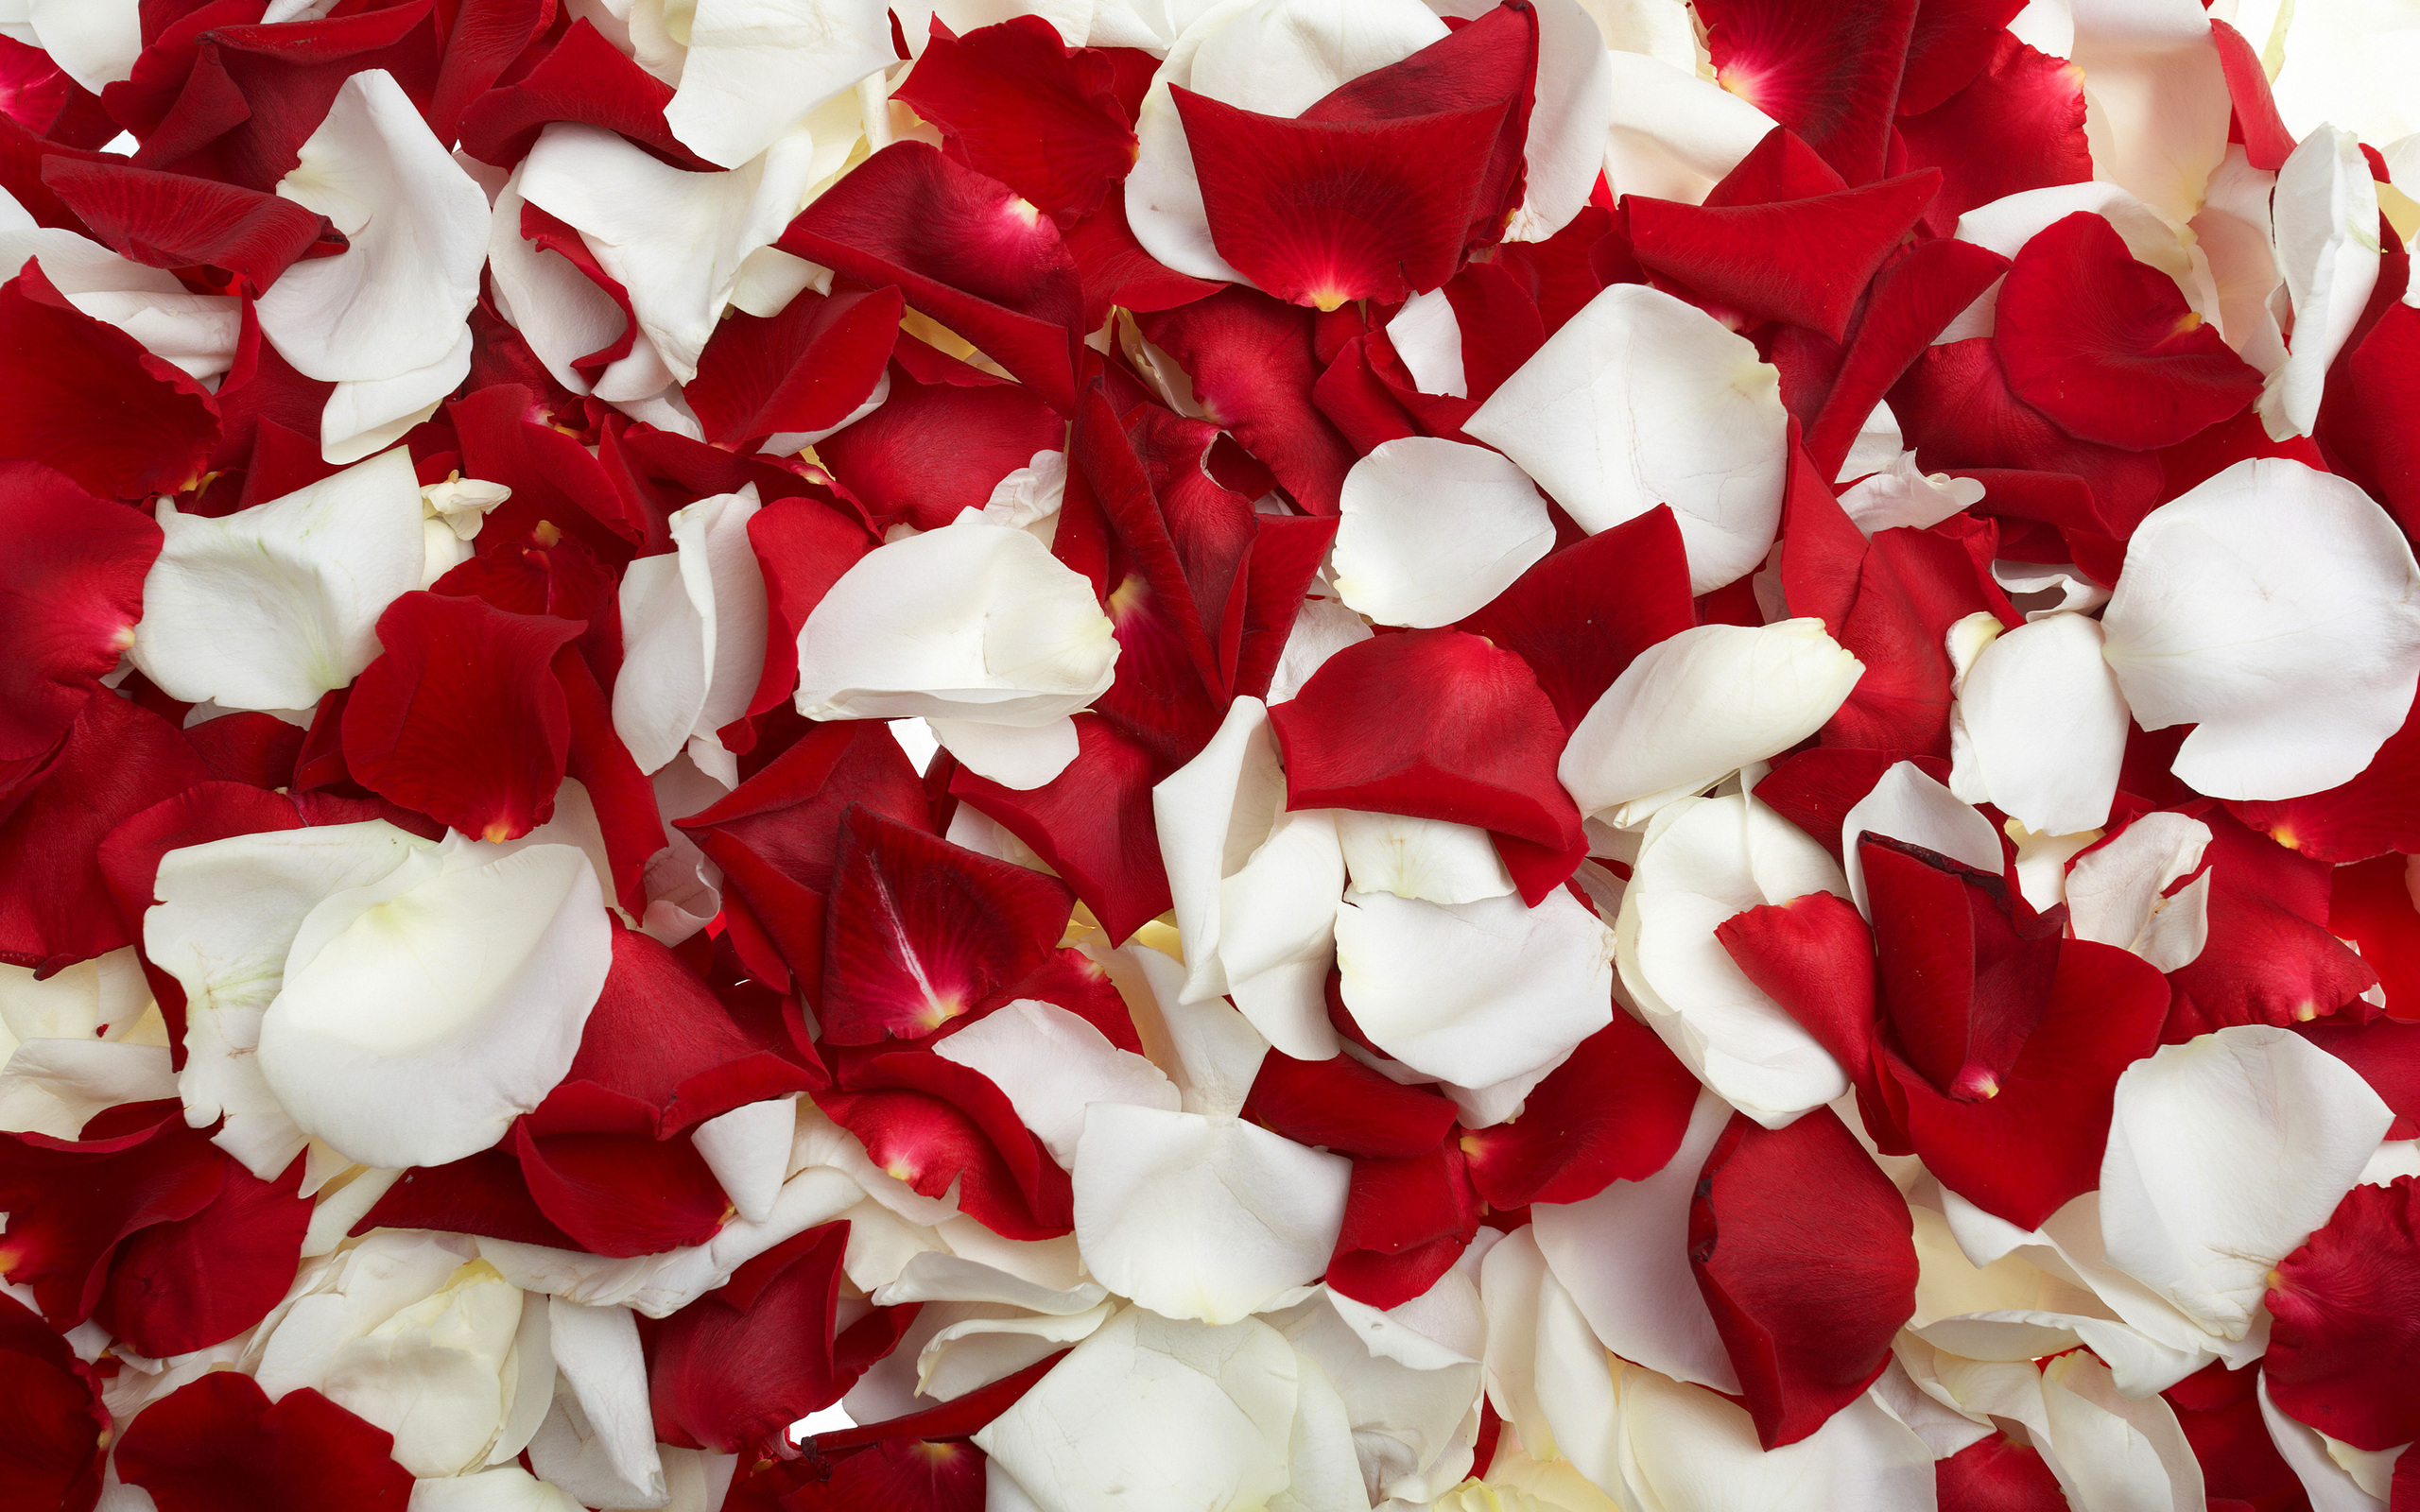 Red And White Rose Petals Wallpaper Pictures